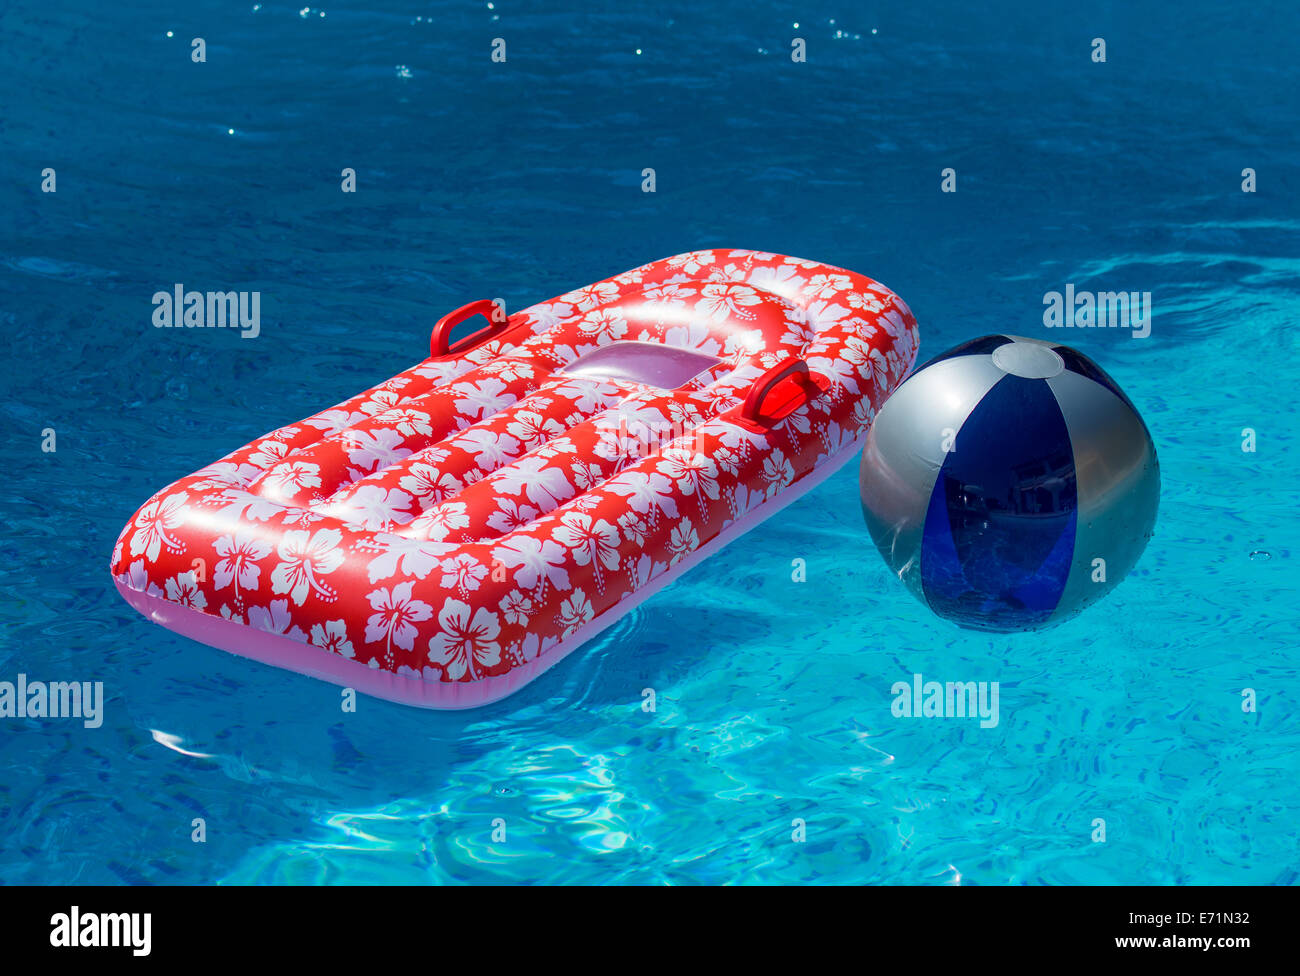 Airbed and Water Ball in Swimming Pool Stock Photo